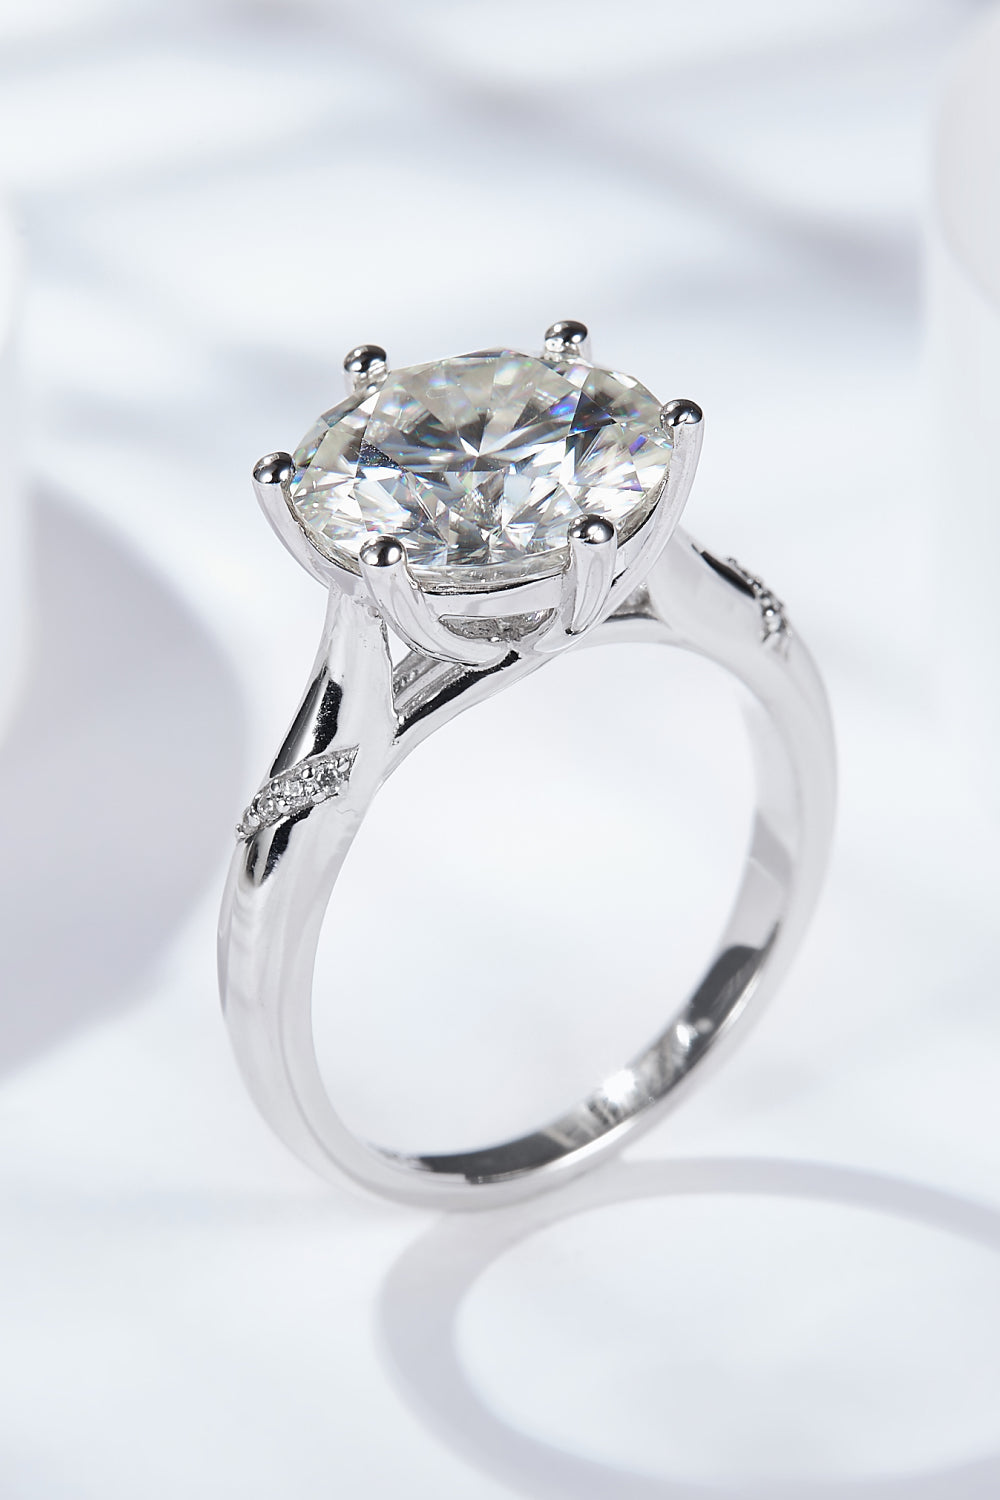 Moissanite Solitaire Ring Image2